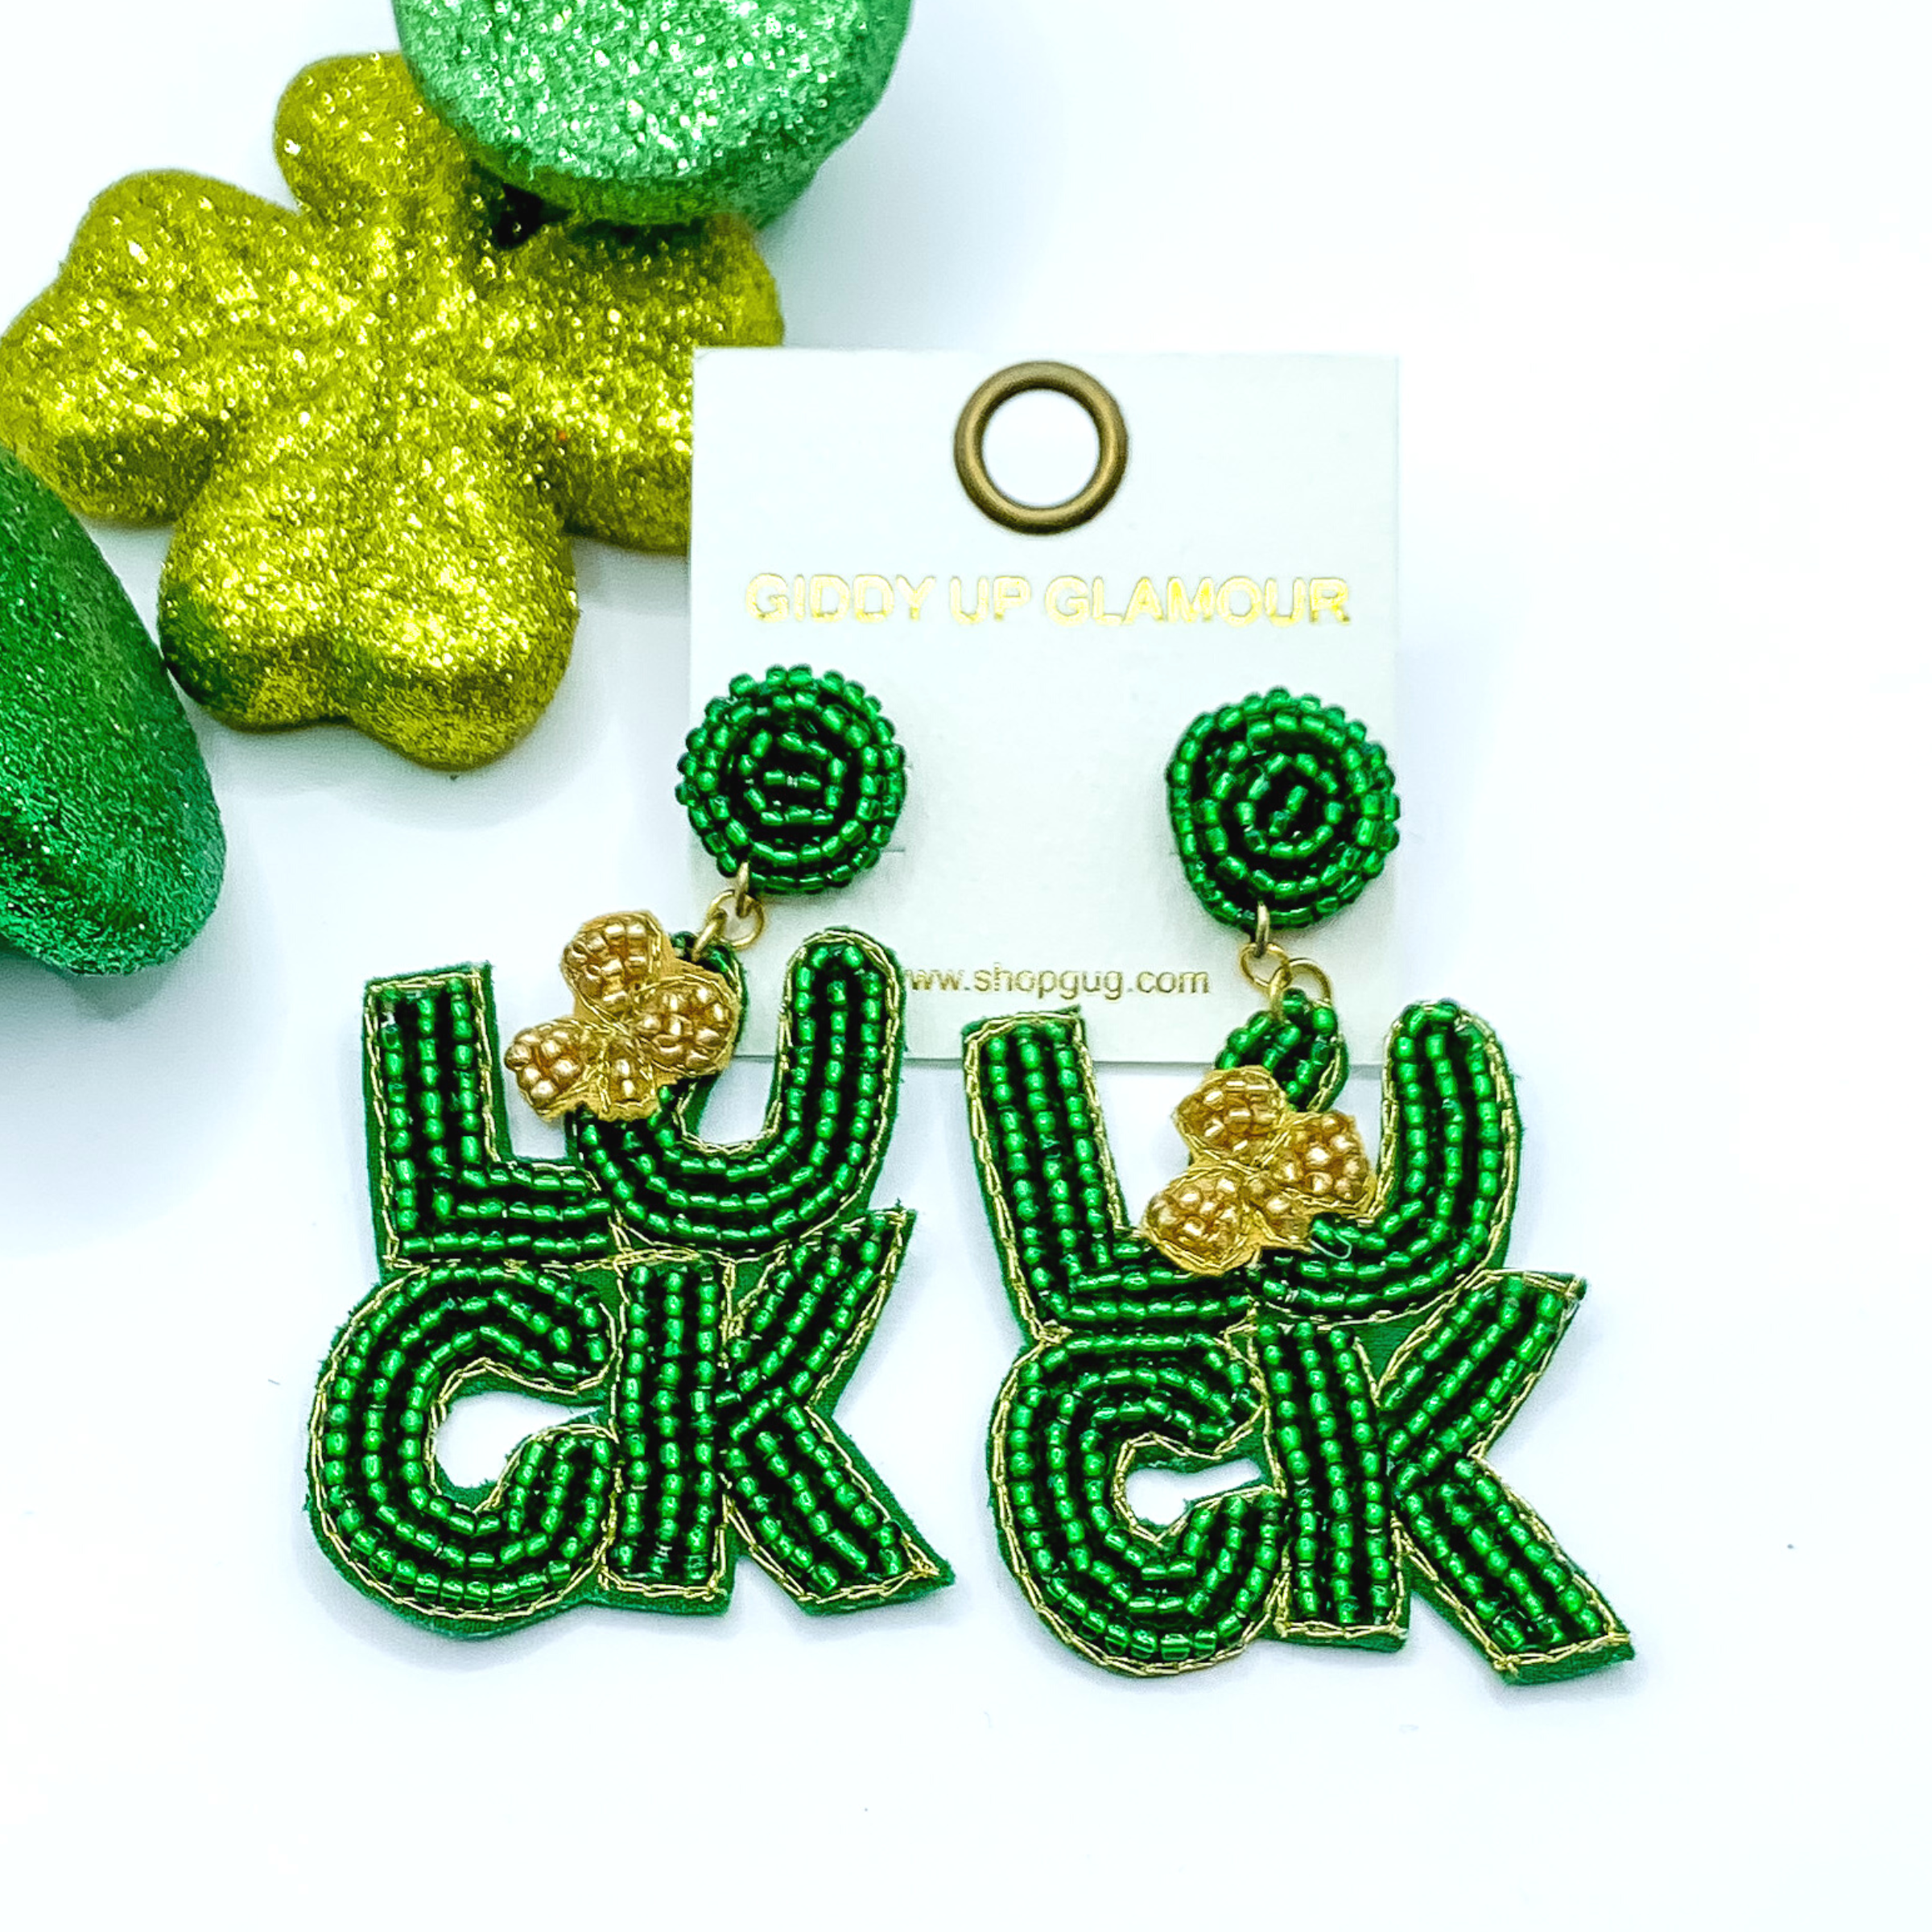 Green beaded circle post back earrings with a beaded pendant. The pendant is the word "LUCK" spelled out with green beads and includes a gold clover on the "U." These earrings are pictured on a white background with green decor in the top left corner. 